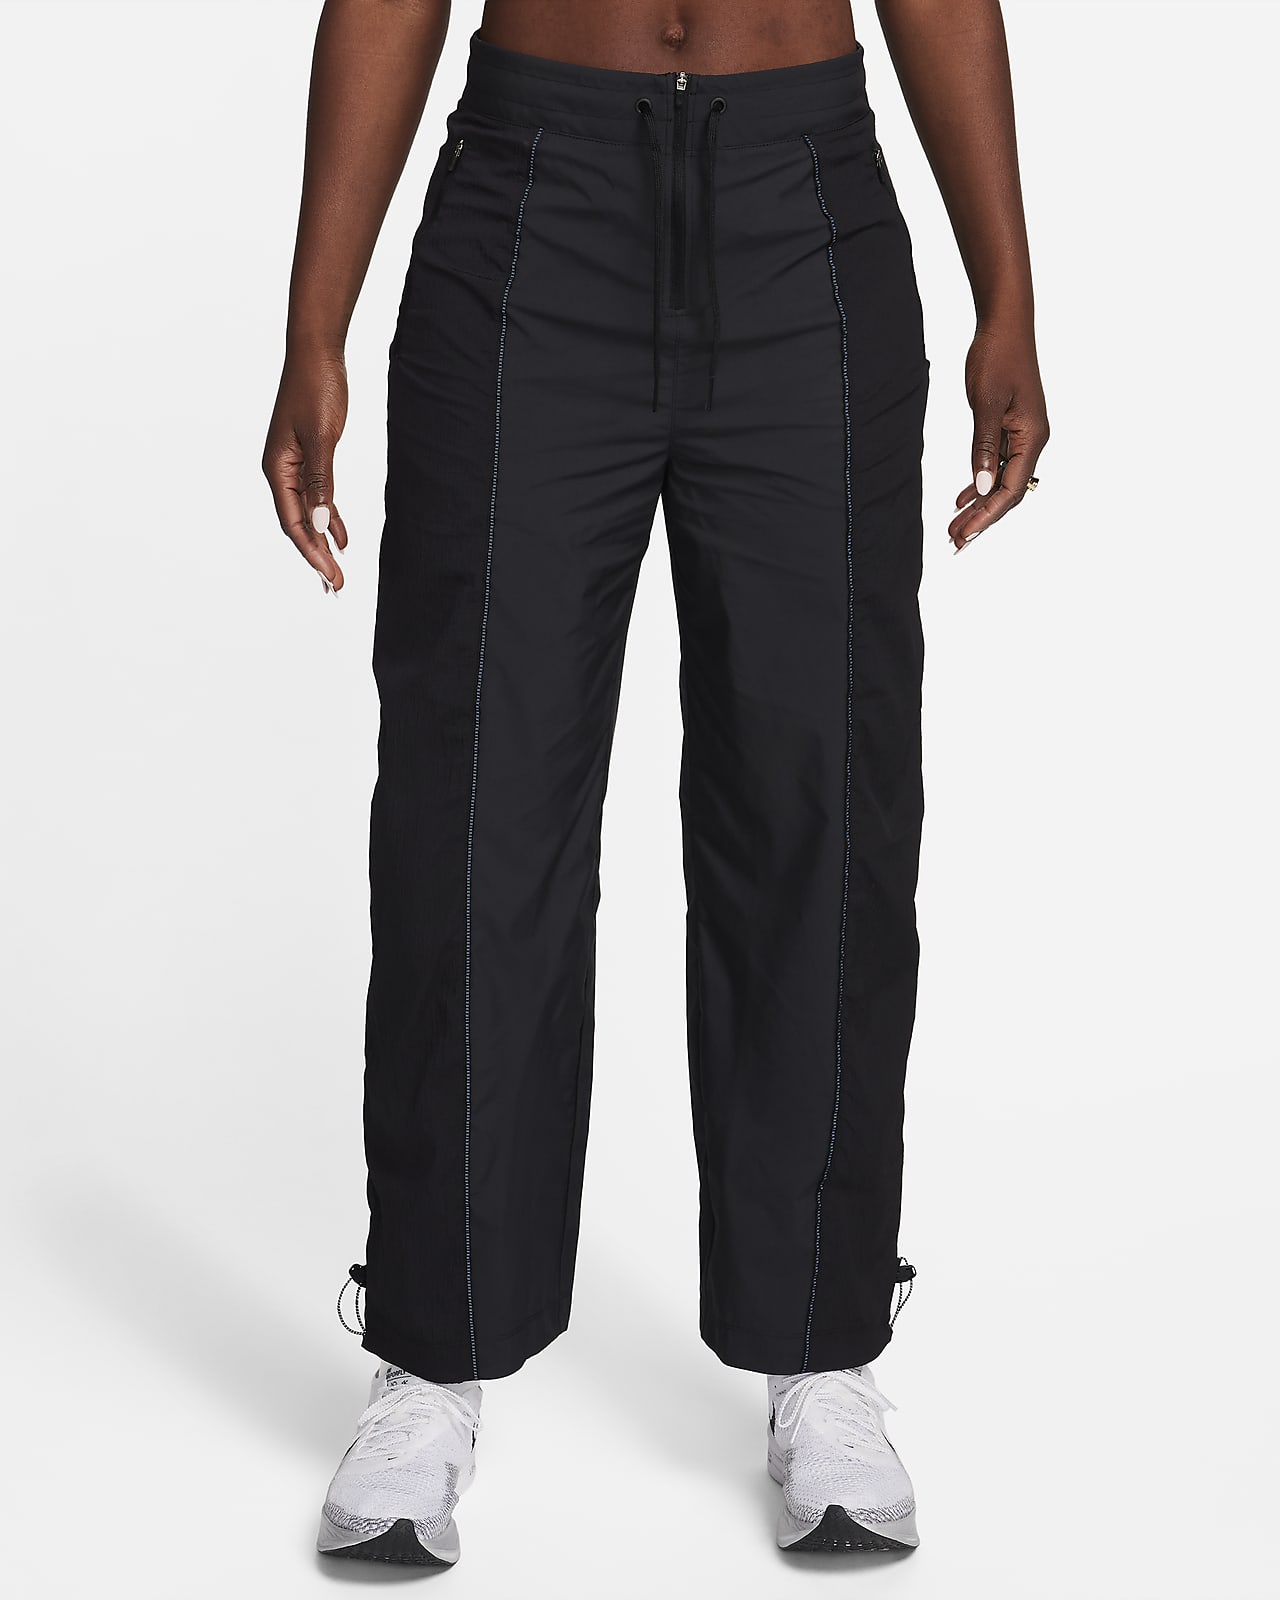 Nike Repel Running Division Women's High-Waisted Pants